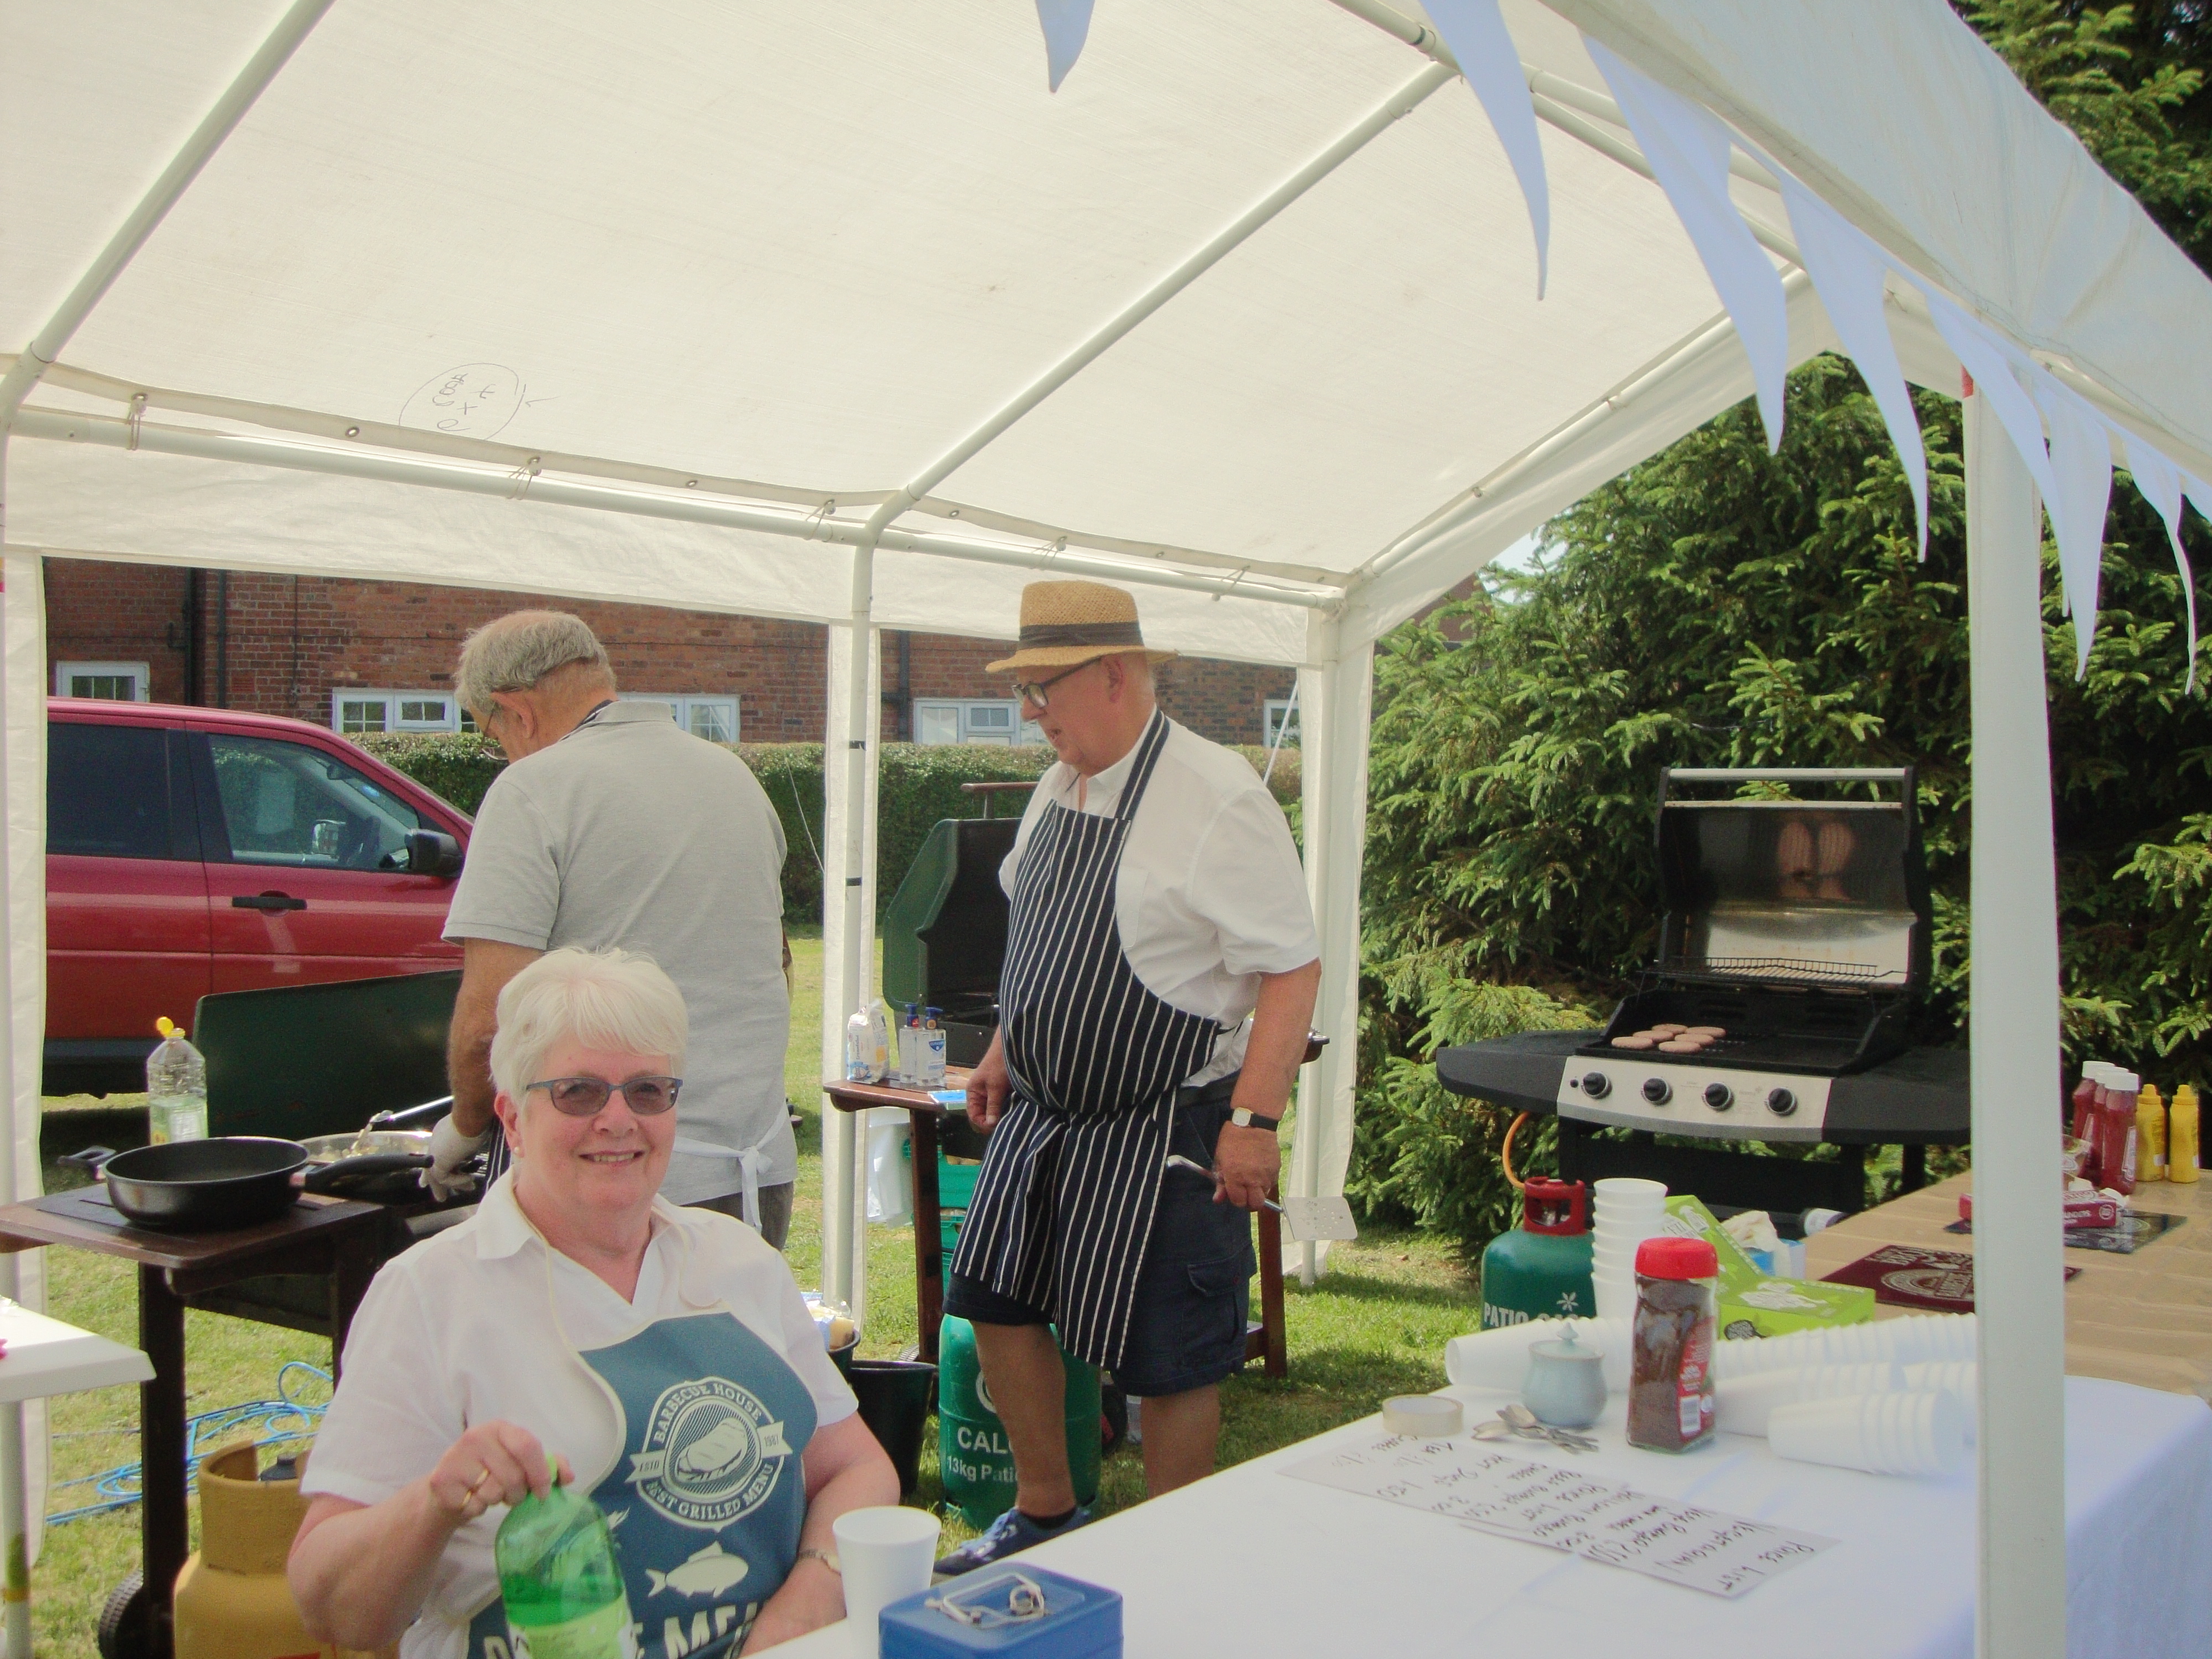 Photographs taken at the Gathering on the Green, June 2019